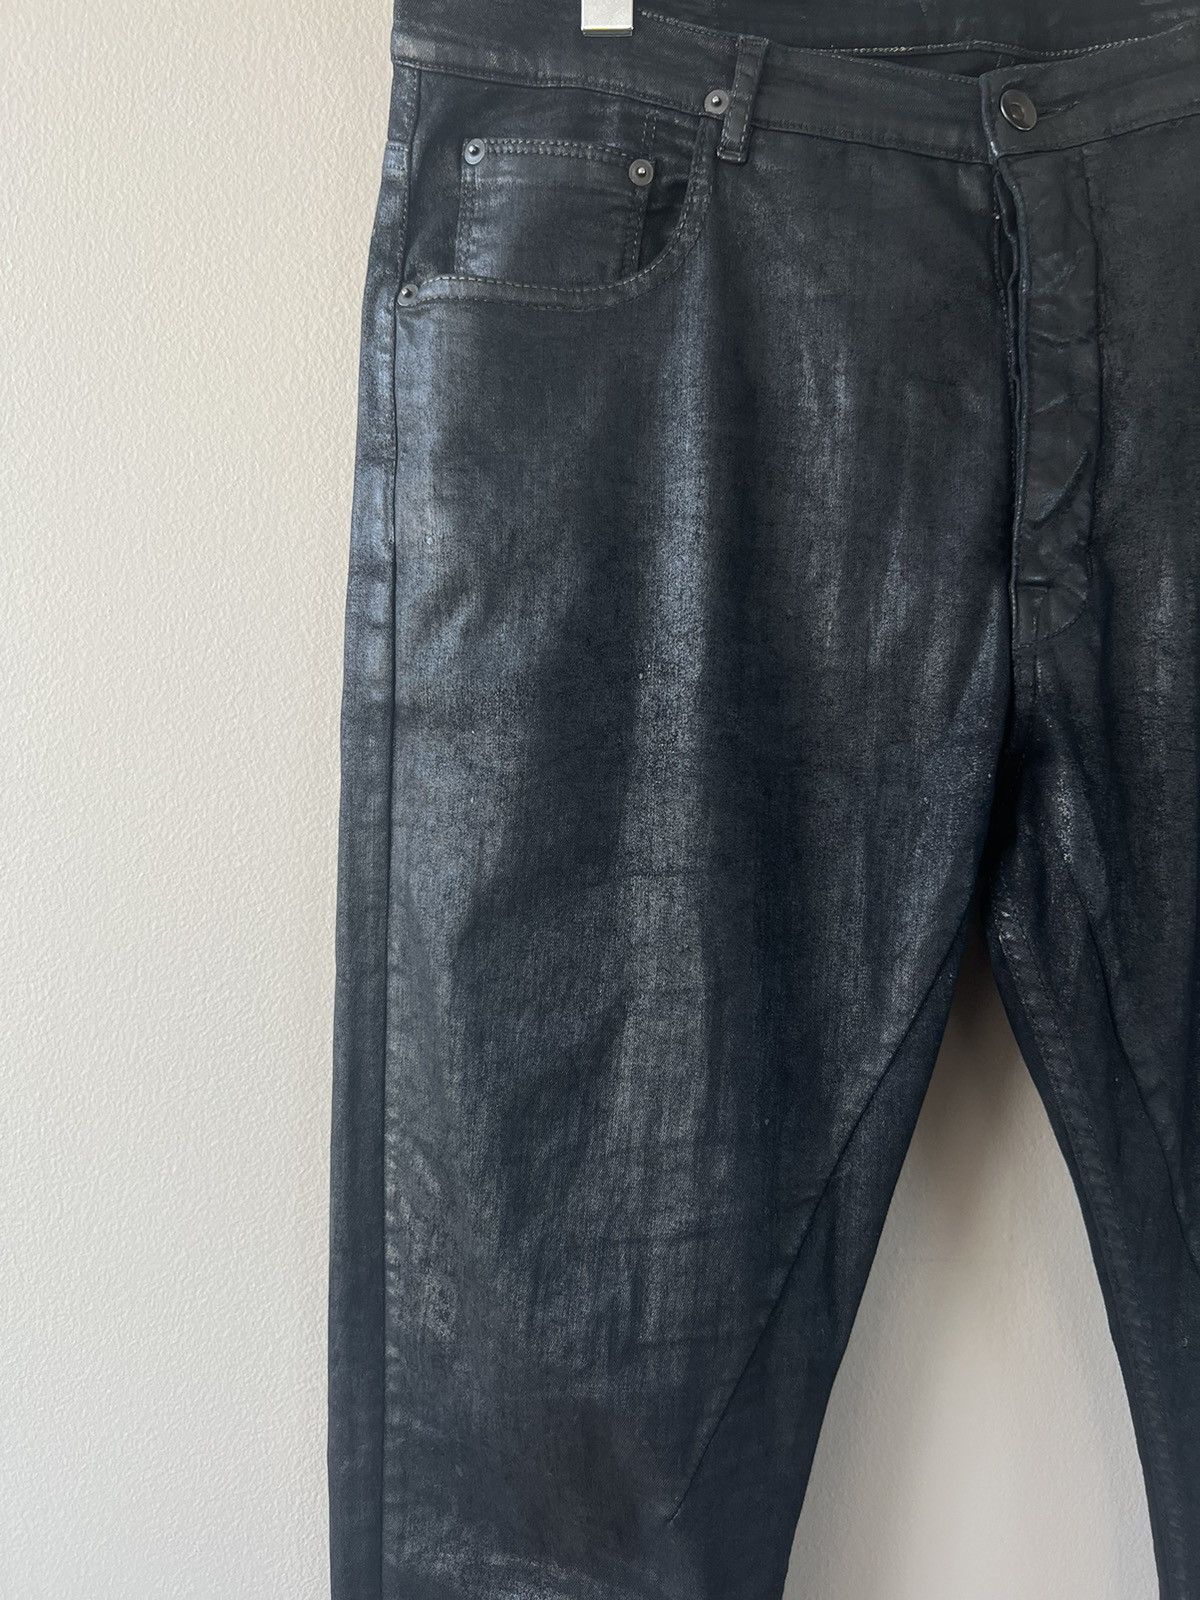 Black Waxed Torrence Cut Jeans - 5